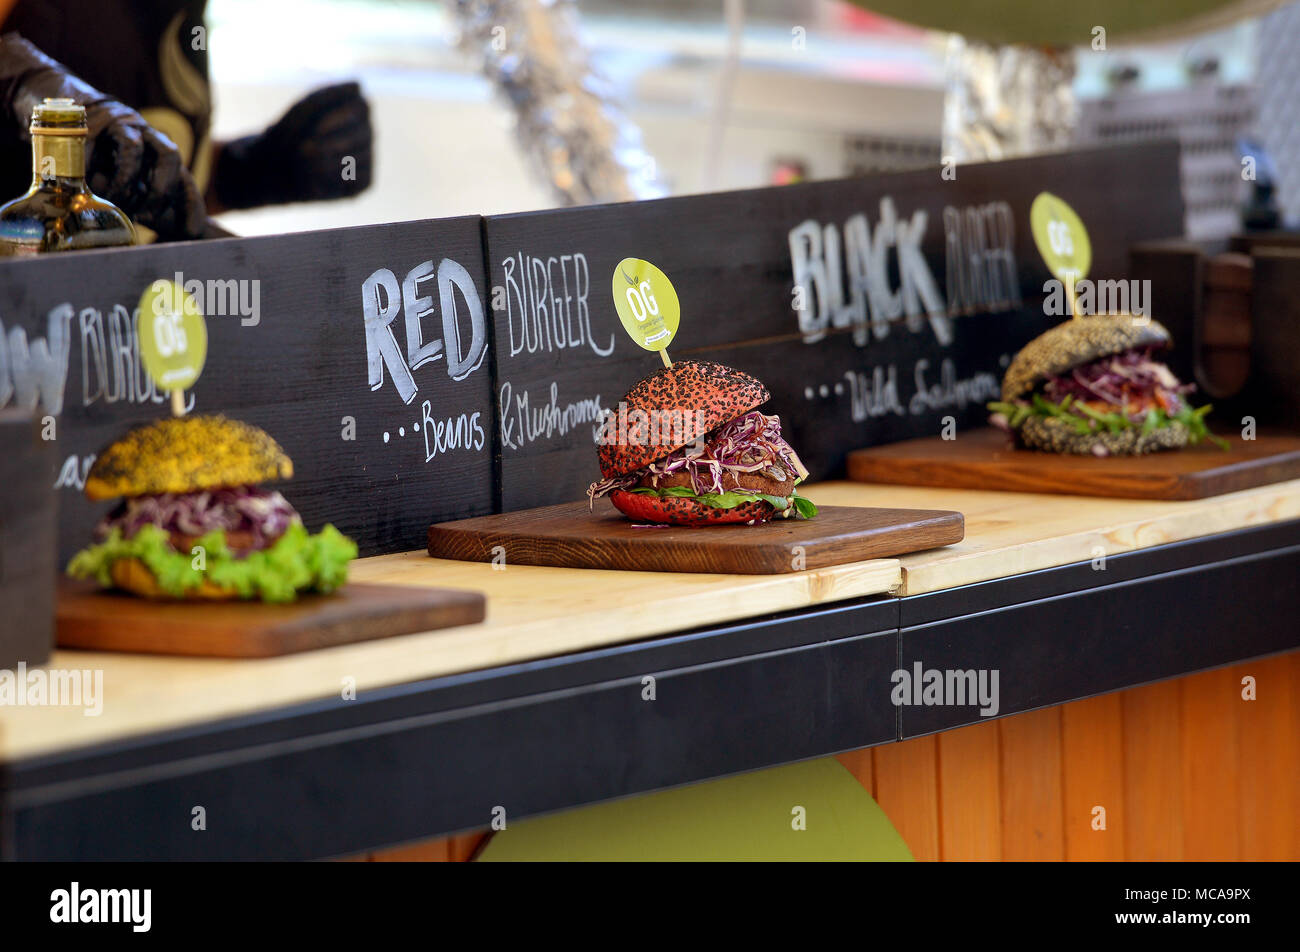 Ljubljana, Slovenia. 14th Apr, 2018. Burgers are presented at the Beer & Burger Fest in Ljubljana, Slovenia, April 14, 2018. The 10th Beer & Burger Fest is held here on April 14 and 15. A wide range of craft beers and gourmet burgers are on offer at the event. Credit: Matic Stojs/Xinhua/Alamy Live News Stock Photo